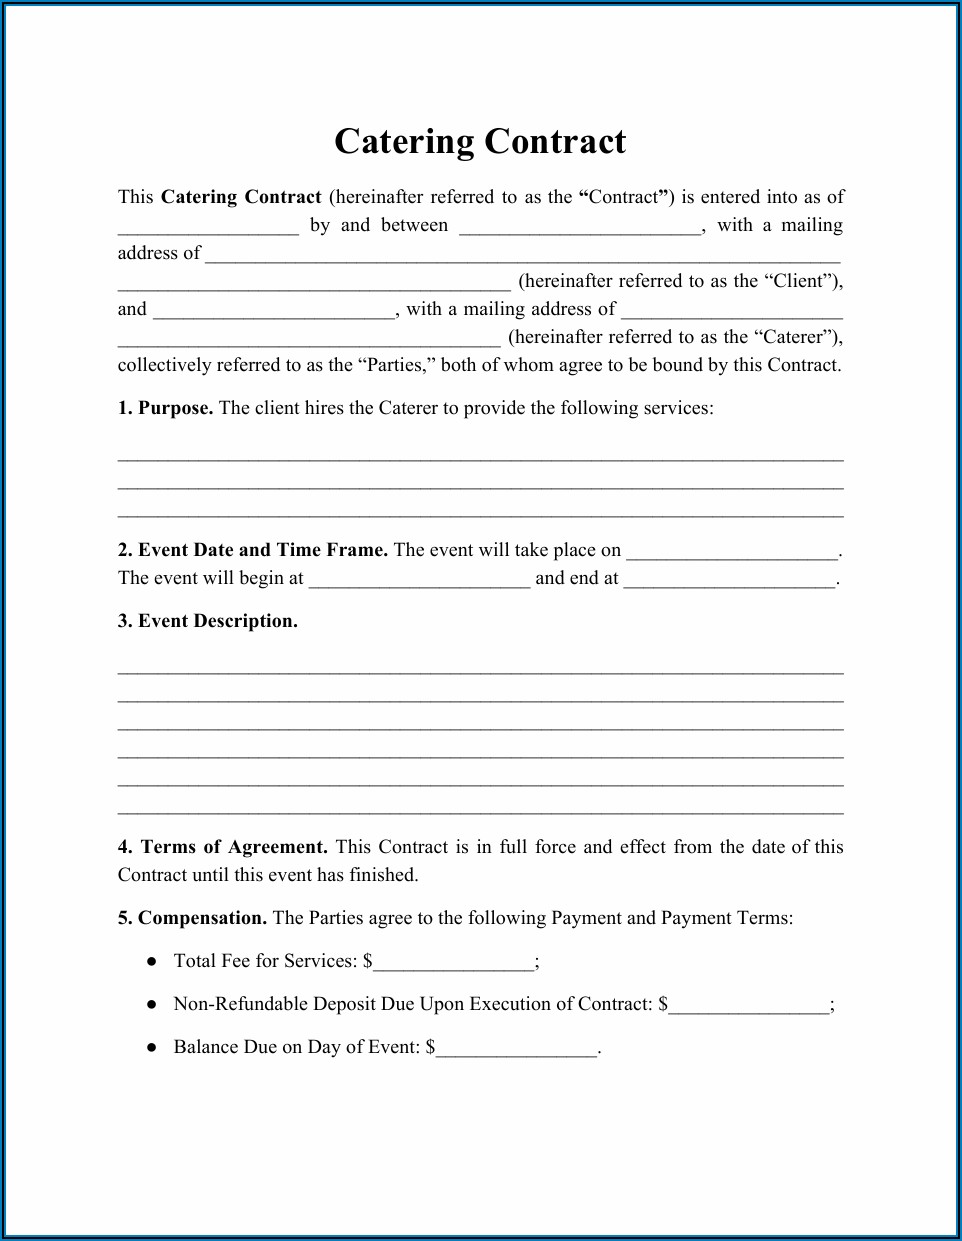 Catering Services Contract Agreement Format